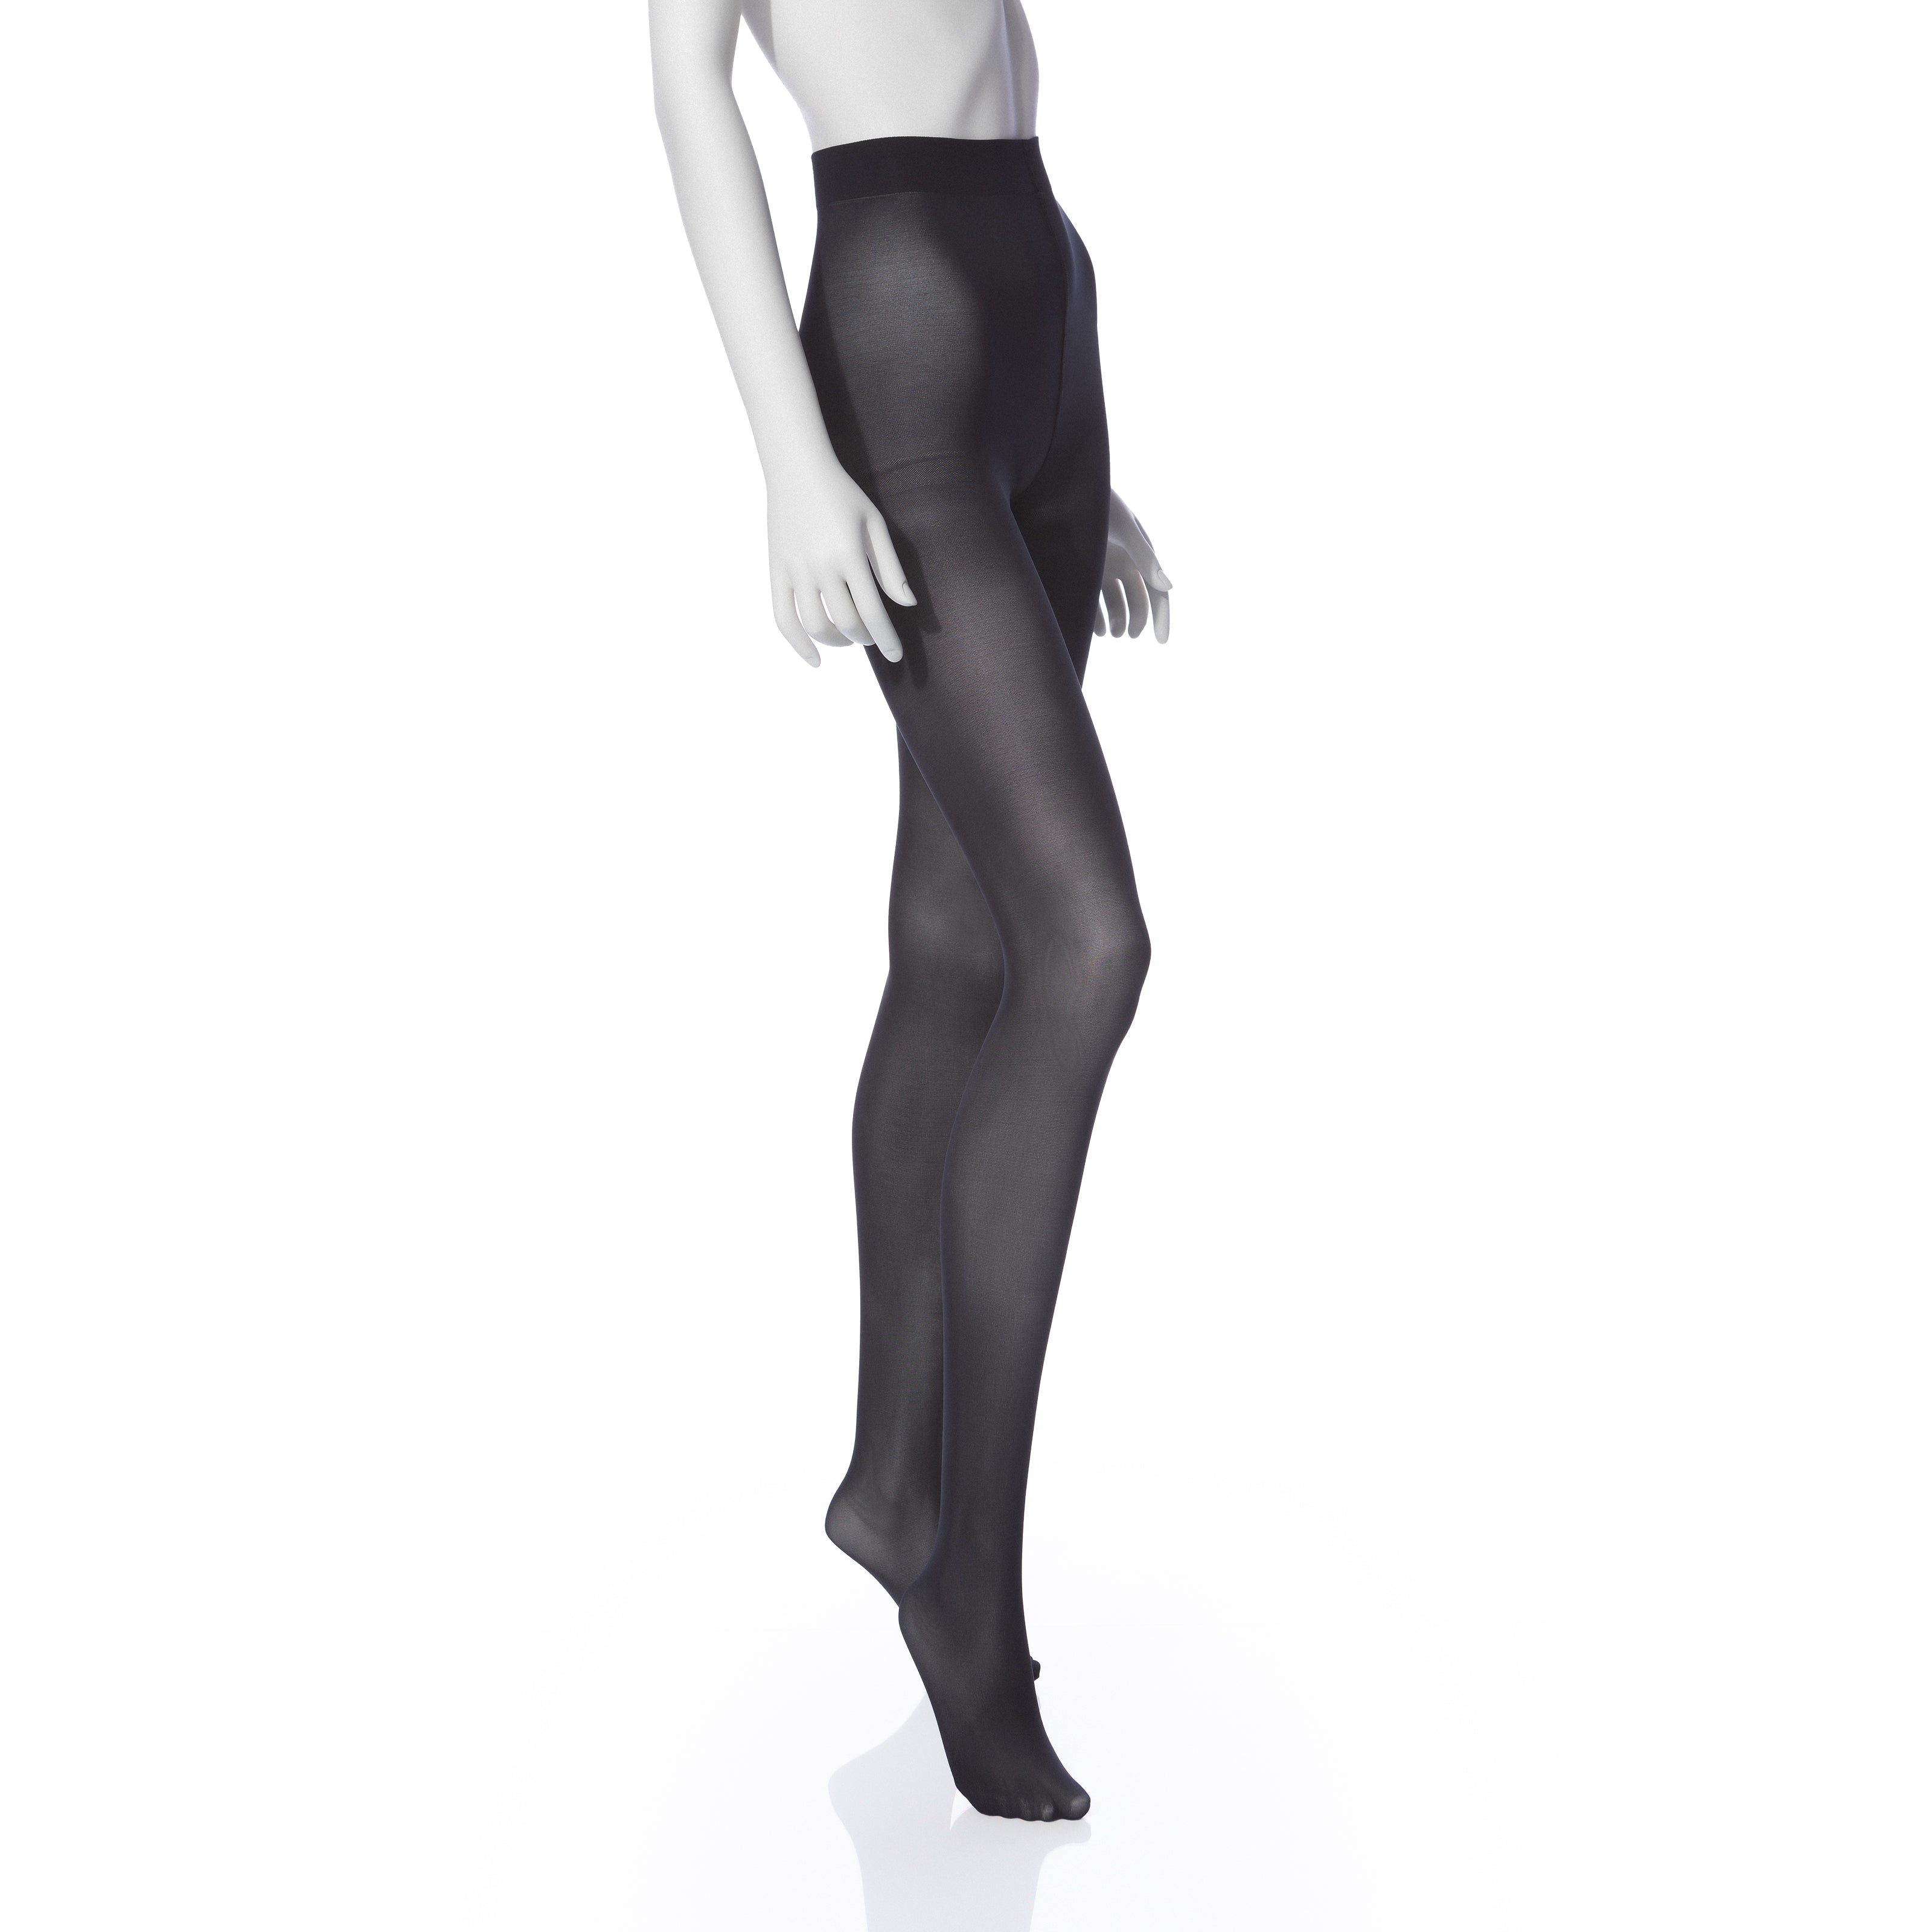 Albertina recycled polyamide semi-opaque tights by Miss Lala